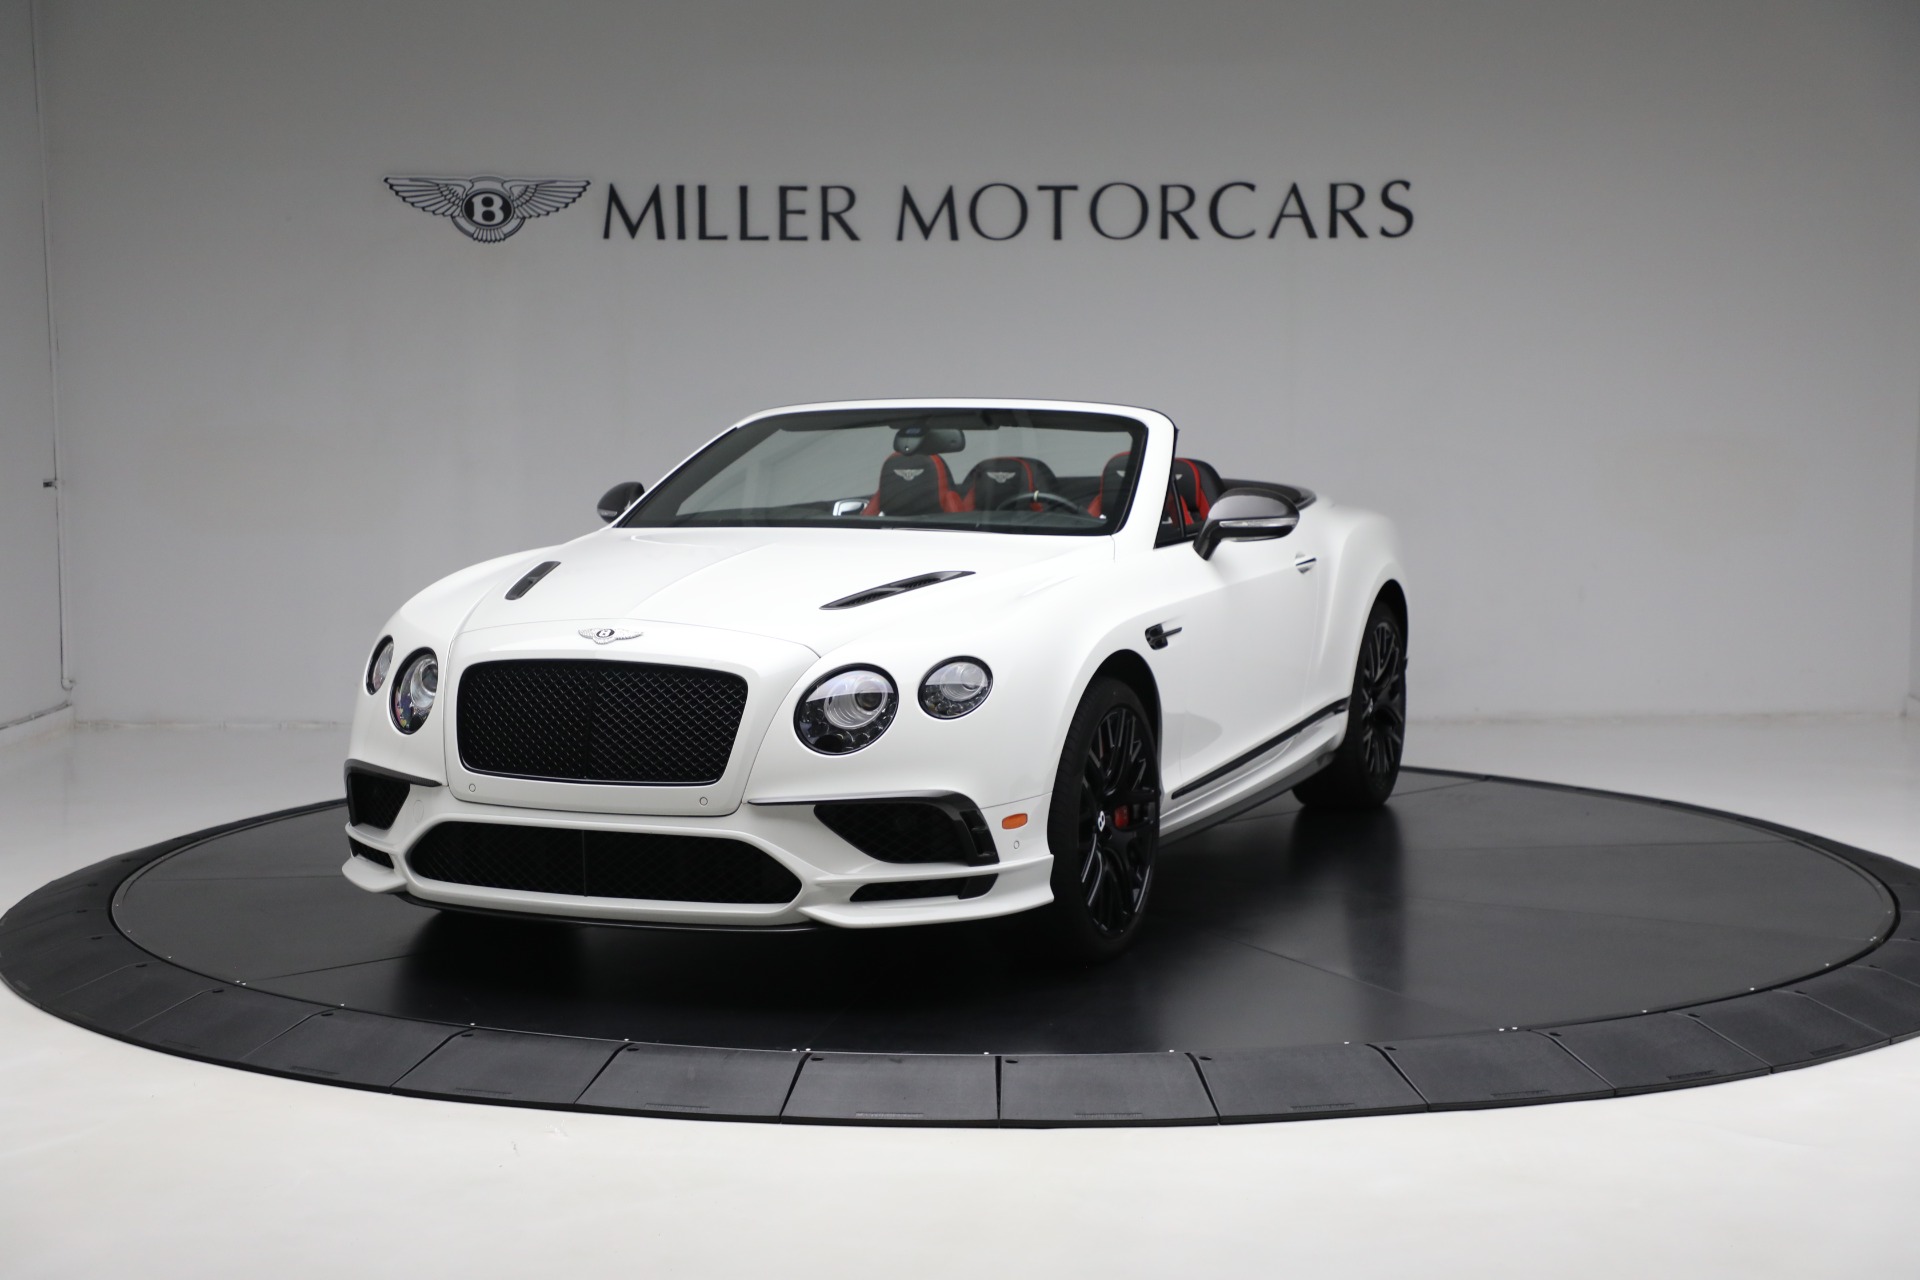 Used 2018 Bentley Continental GTC Supersports Convertible for sale Sold at Pagani of Greenwich in Greenwich CT 06830 1